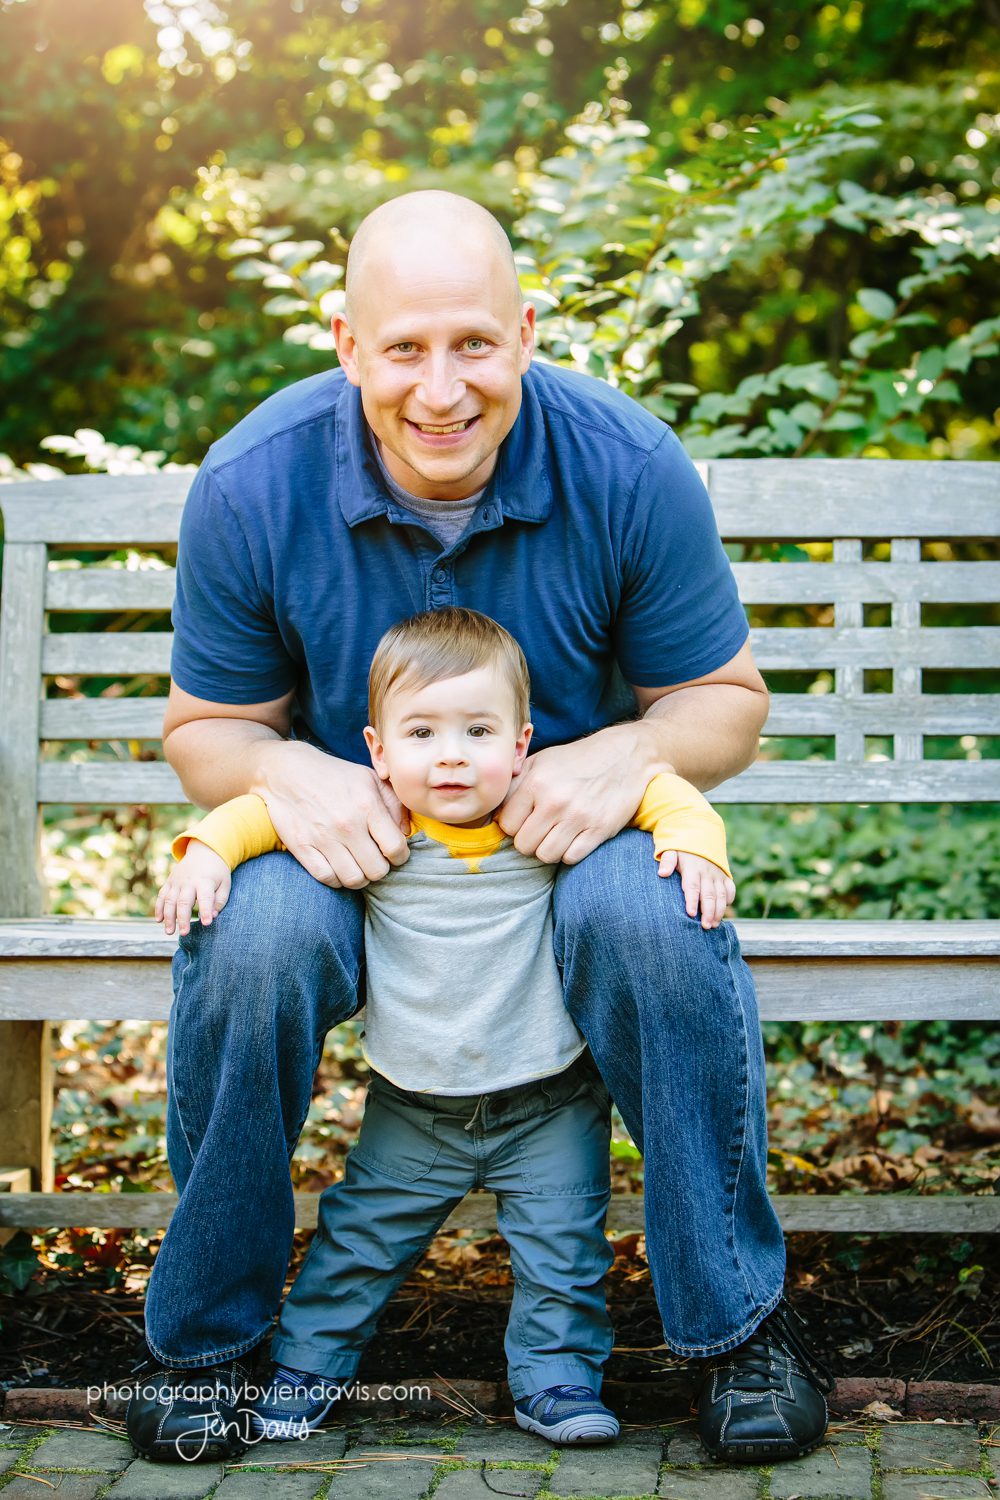 Dad and baby on bench